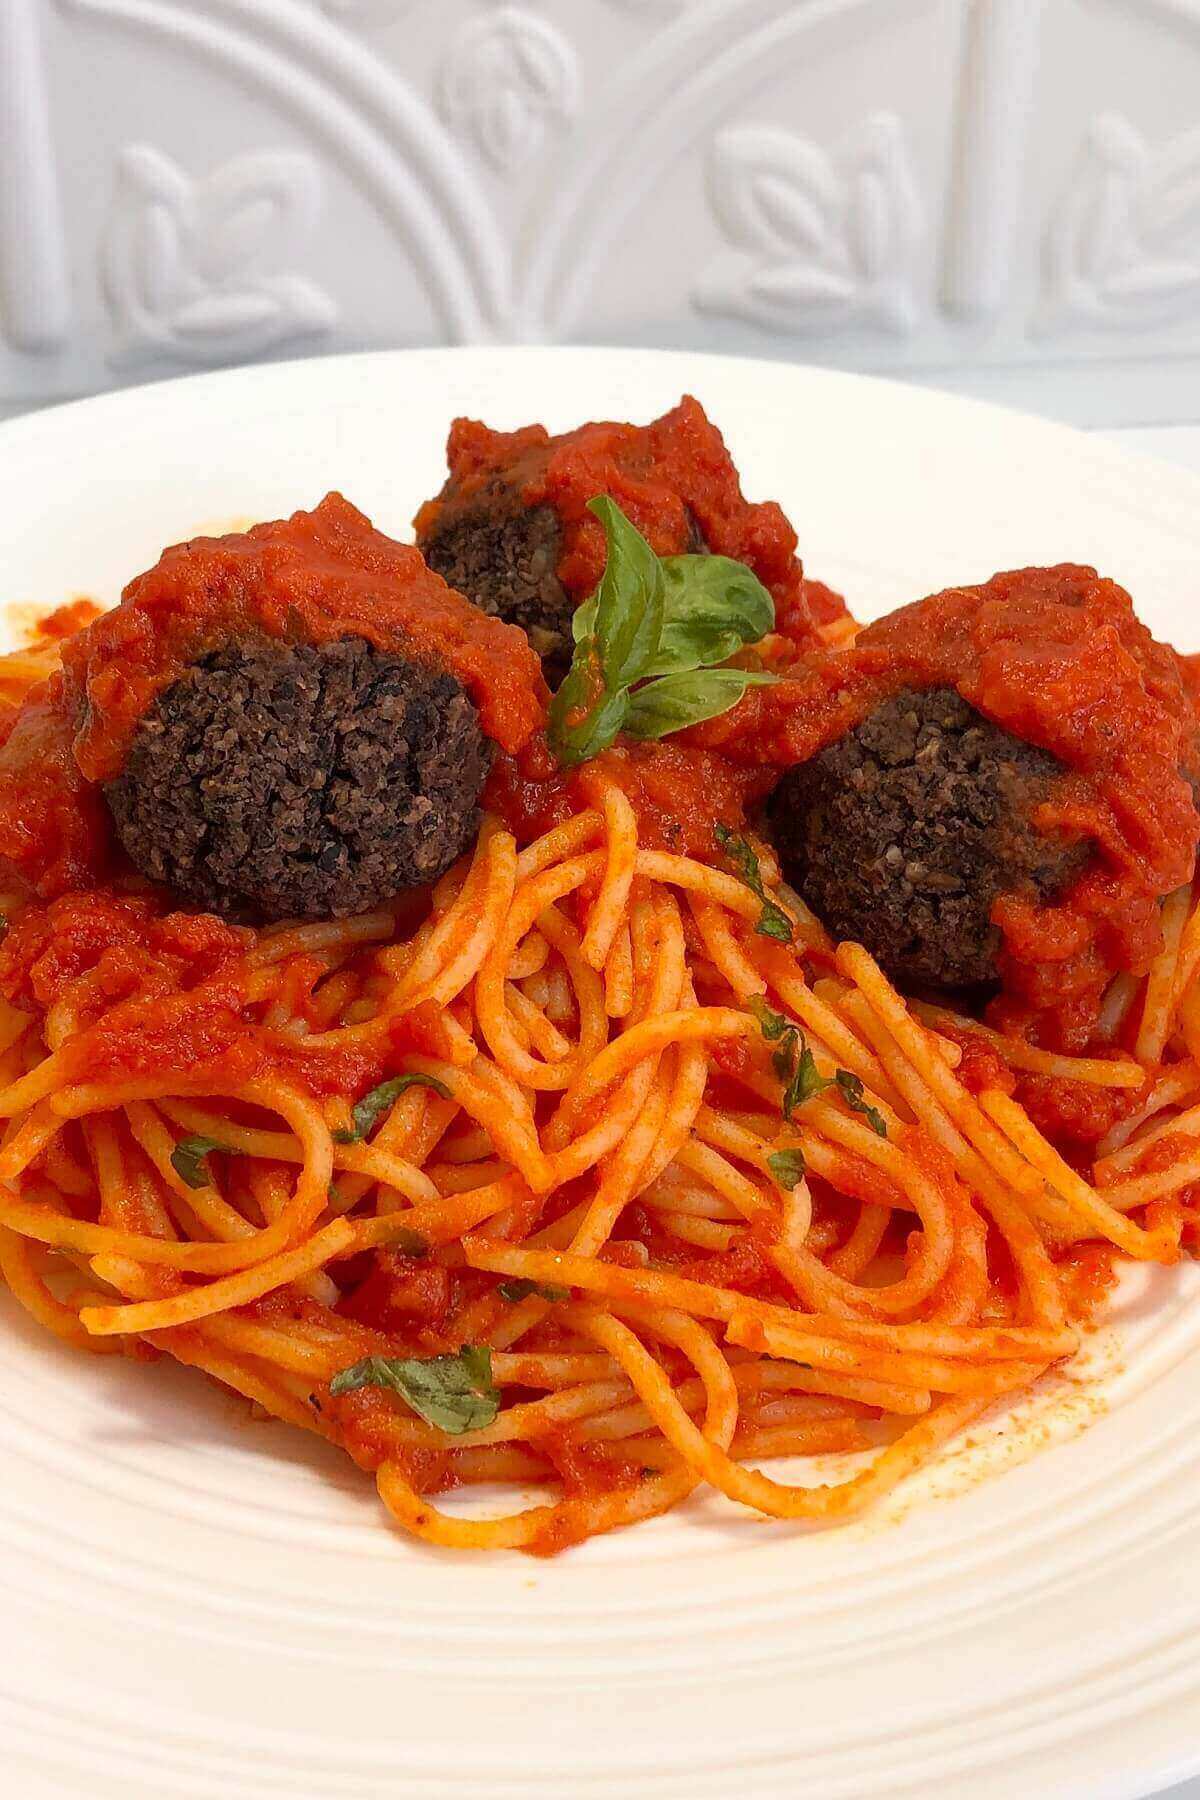 Meatballs and spaghetti with tomato sauce on a plate.